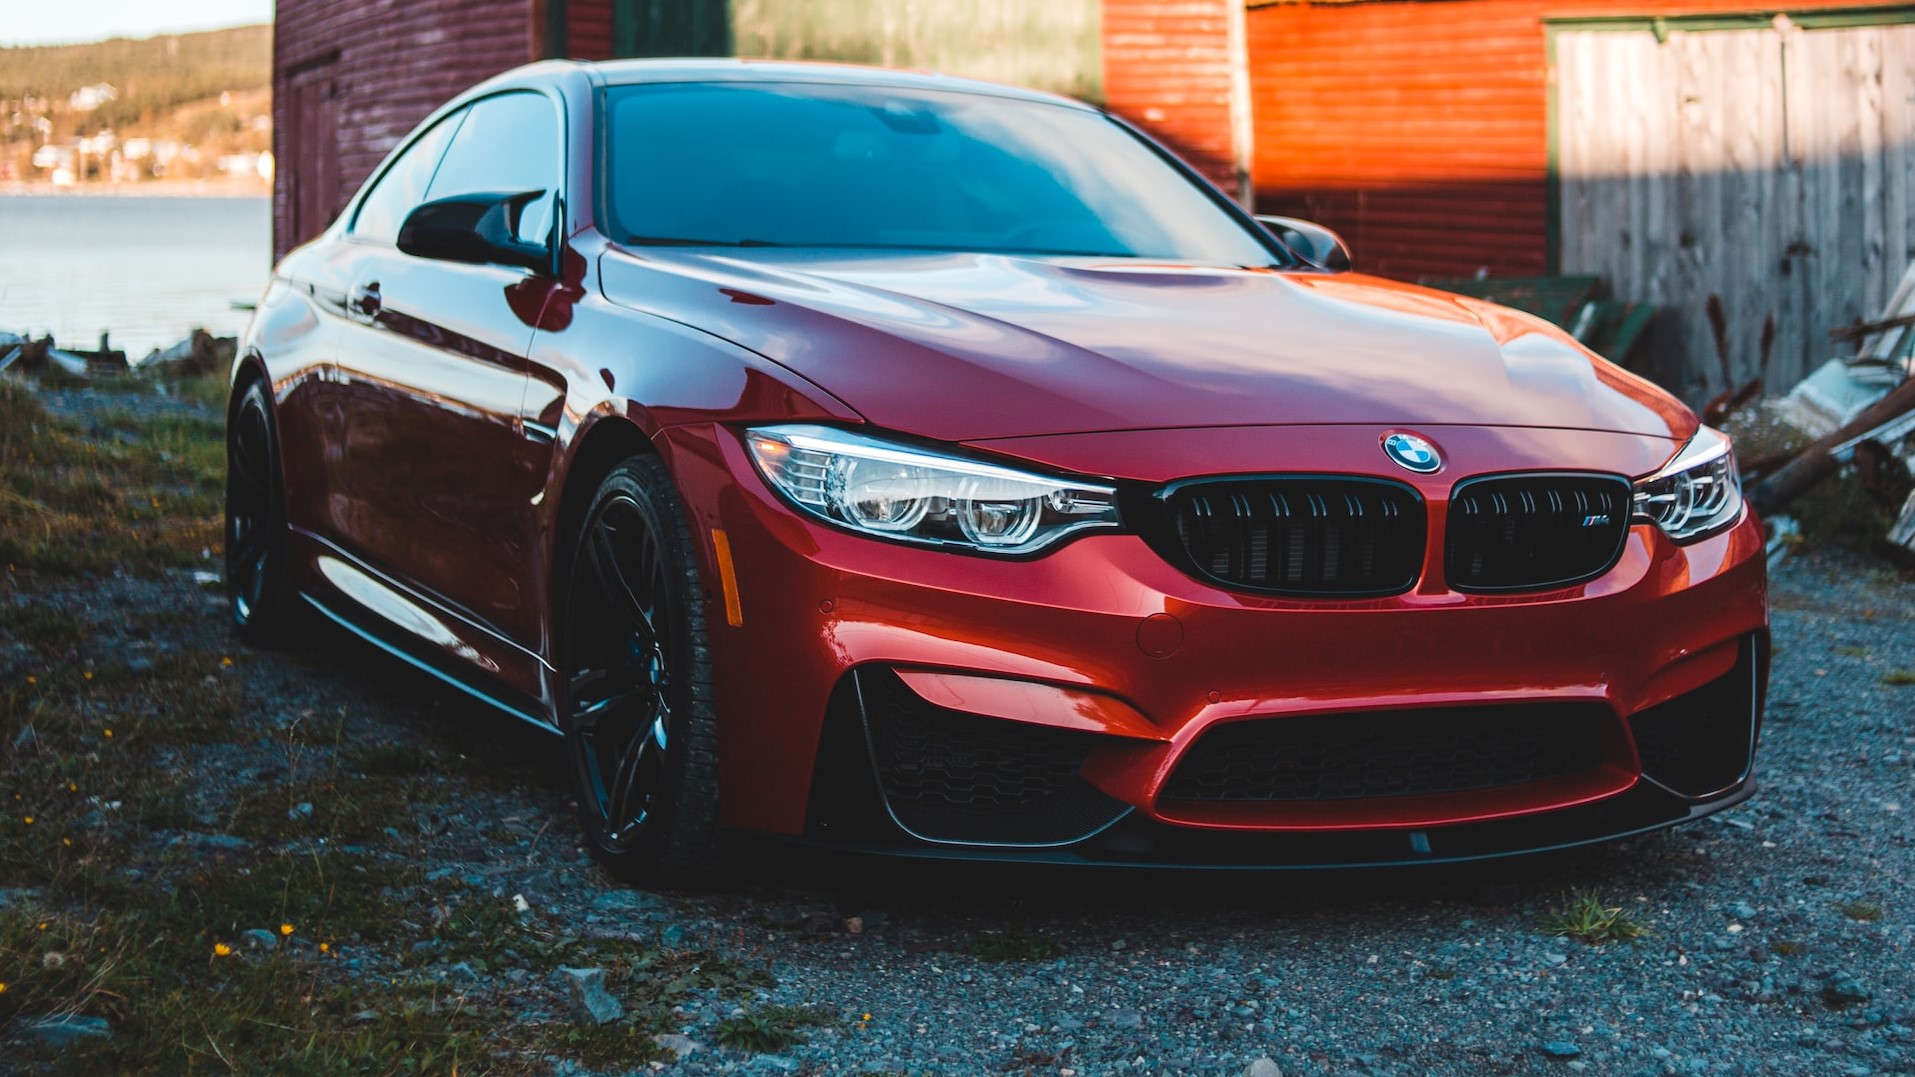 Red bmw parked near brown wooden building | Goodwill Car Donations